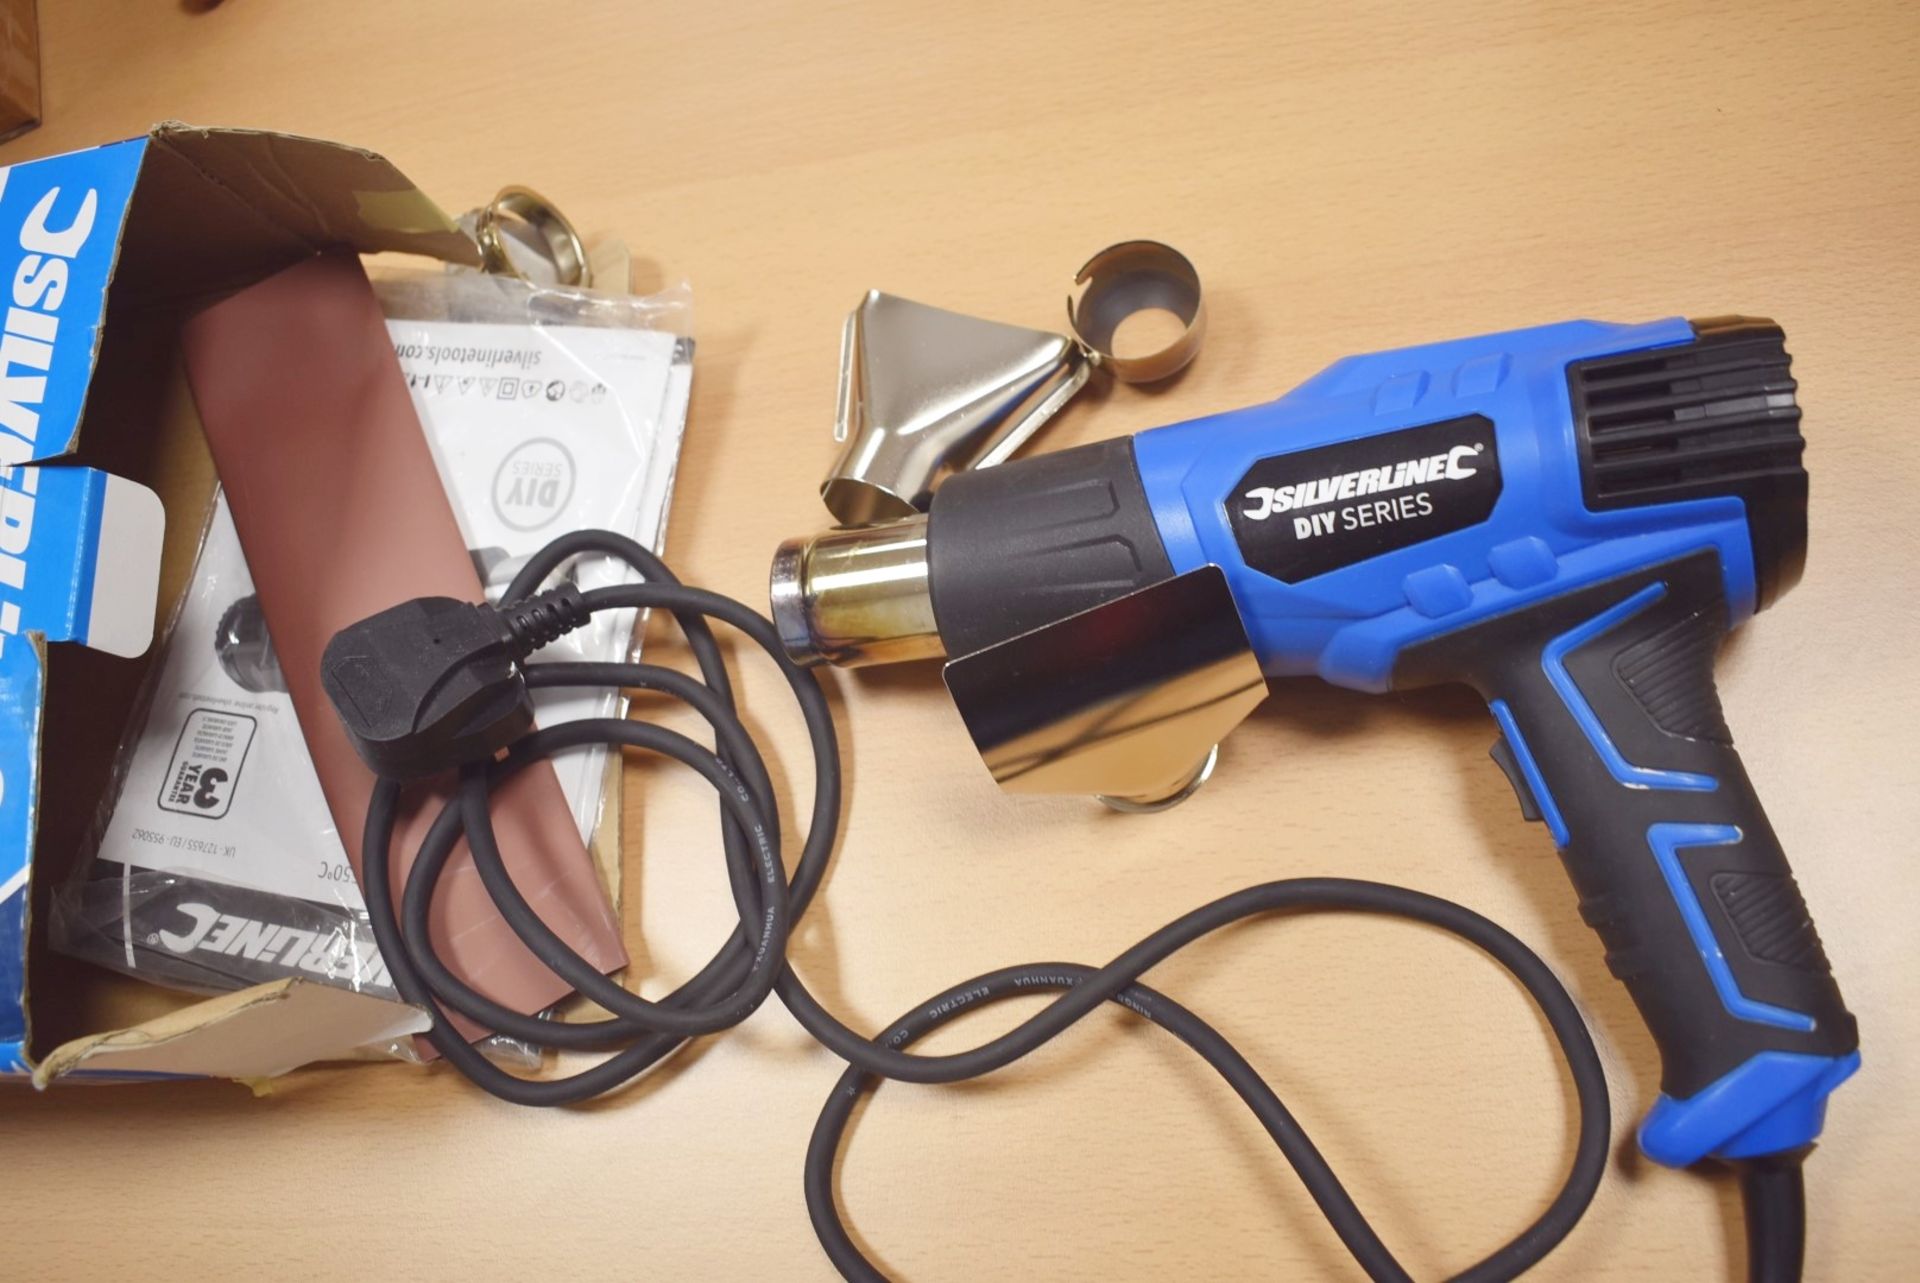 1 x Silverline DIY 200w 550c Heat Gun - Boxed With Accessories - Image 5 of 6